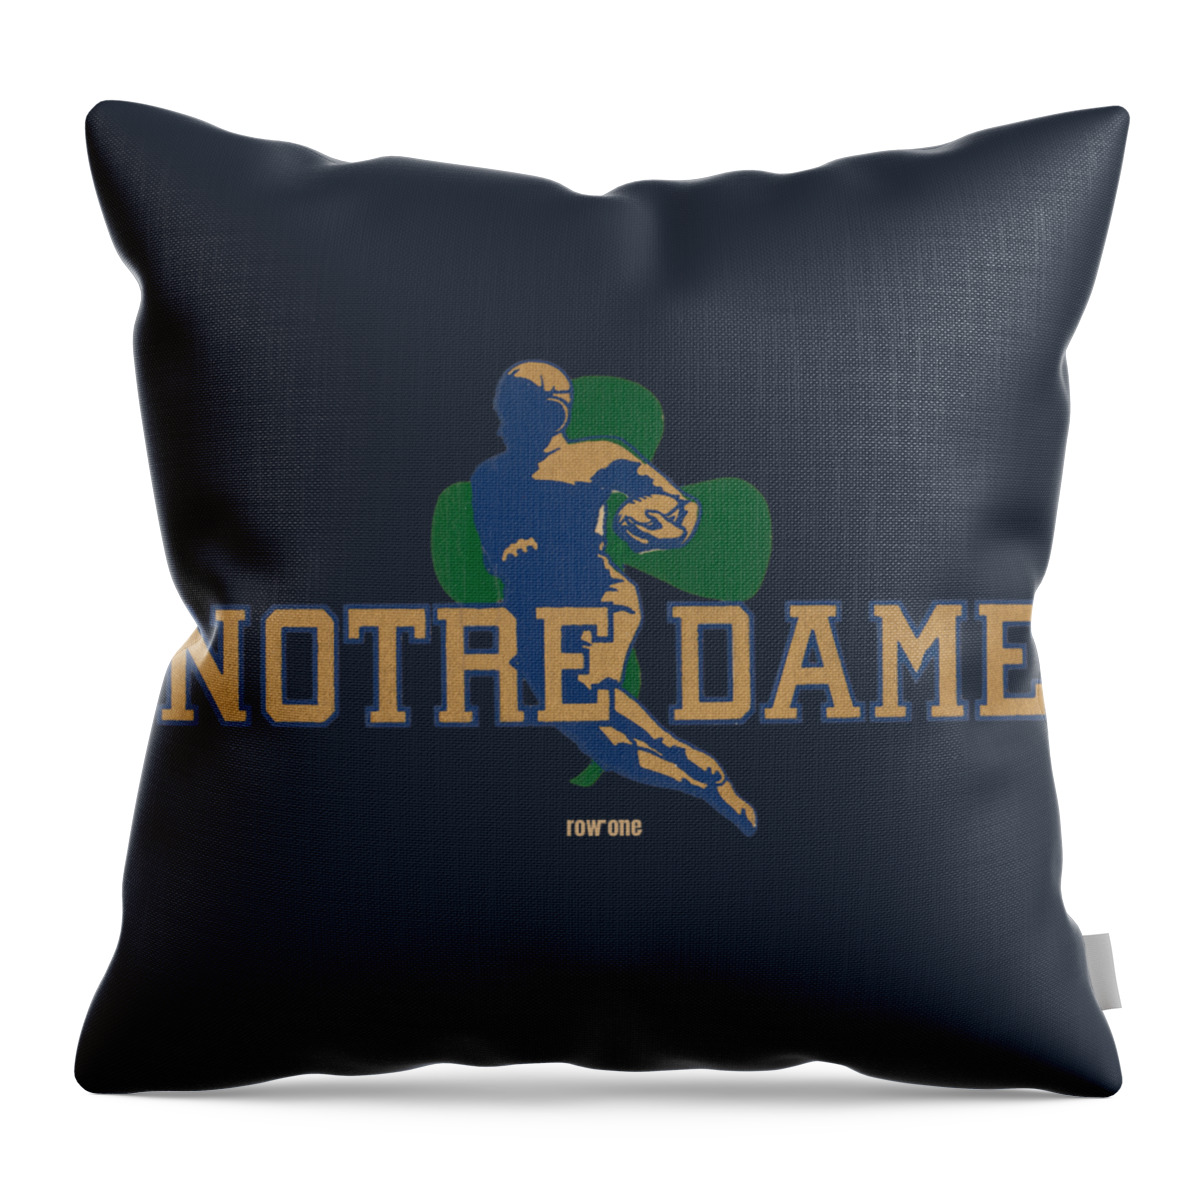 Notre Dame Throw Pillow featuring the mixed media Vintage Notre Dame Football Art by Row One Brand